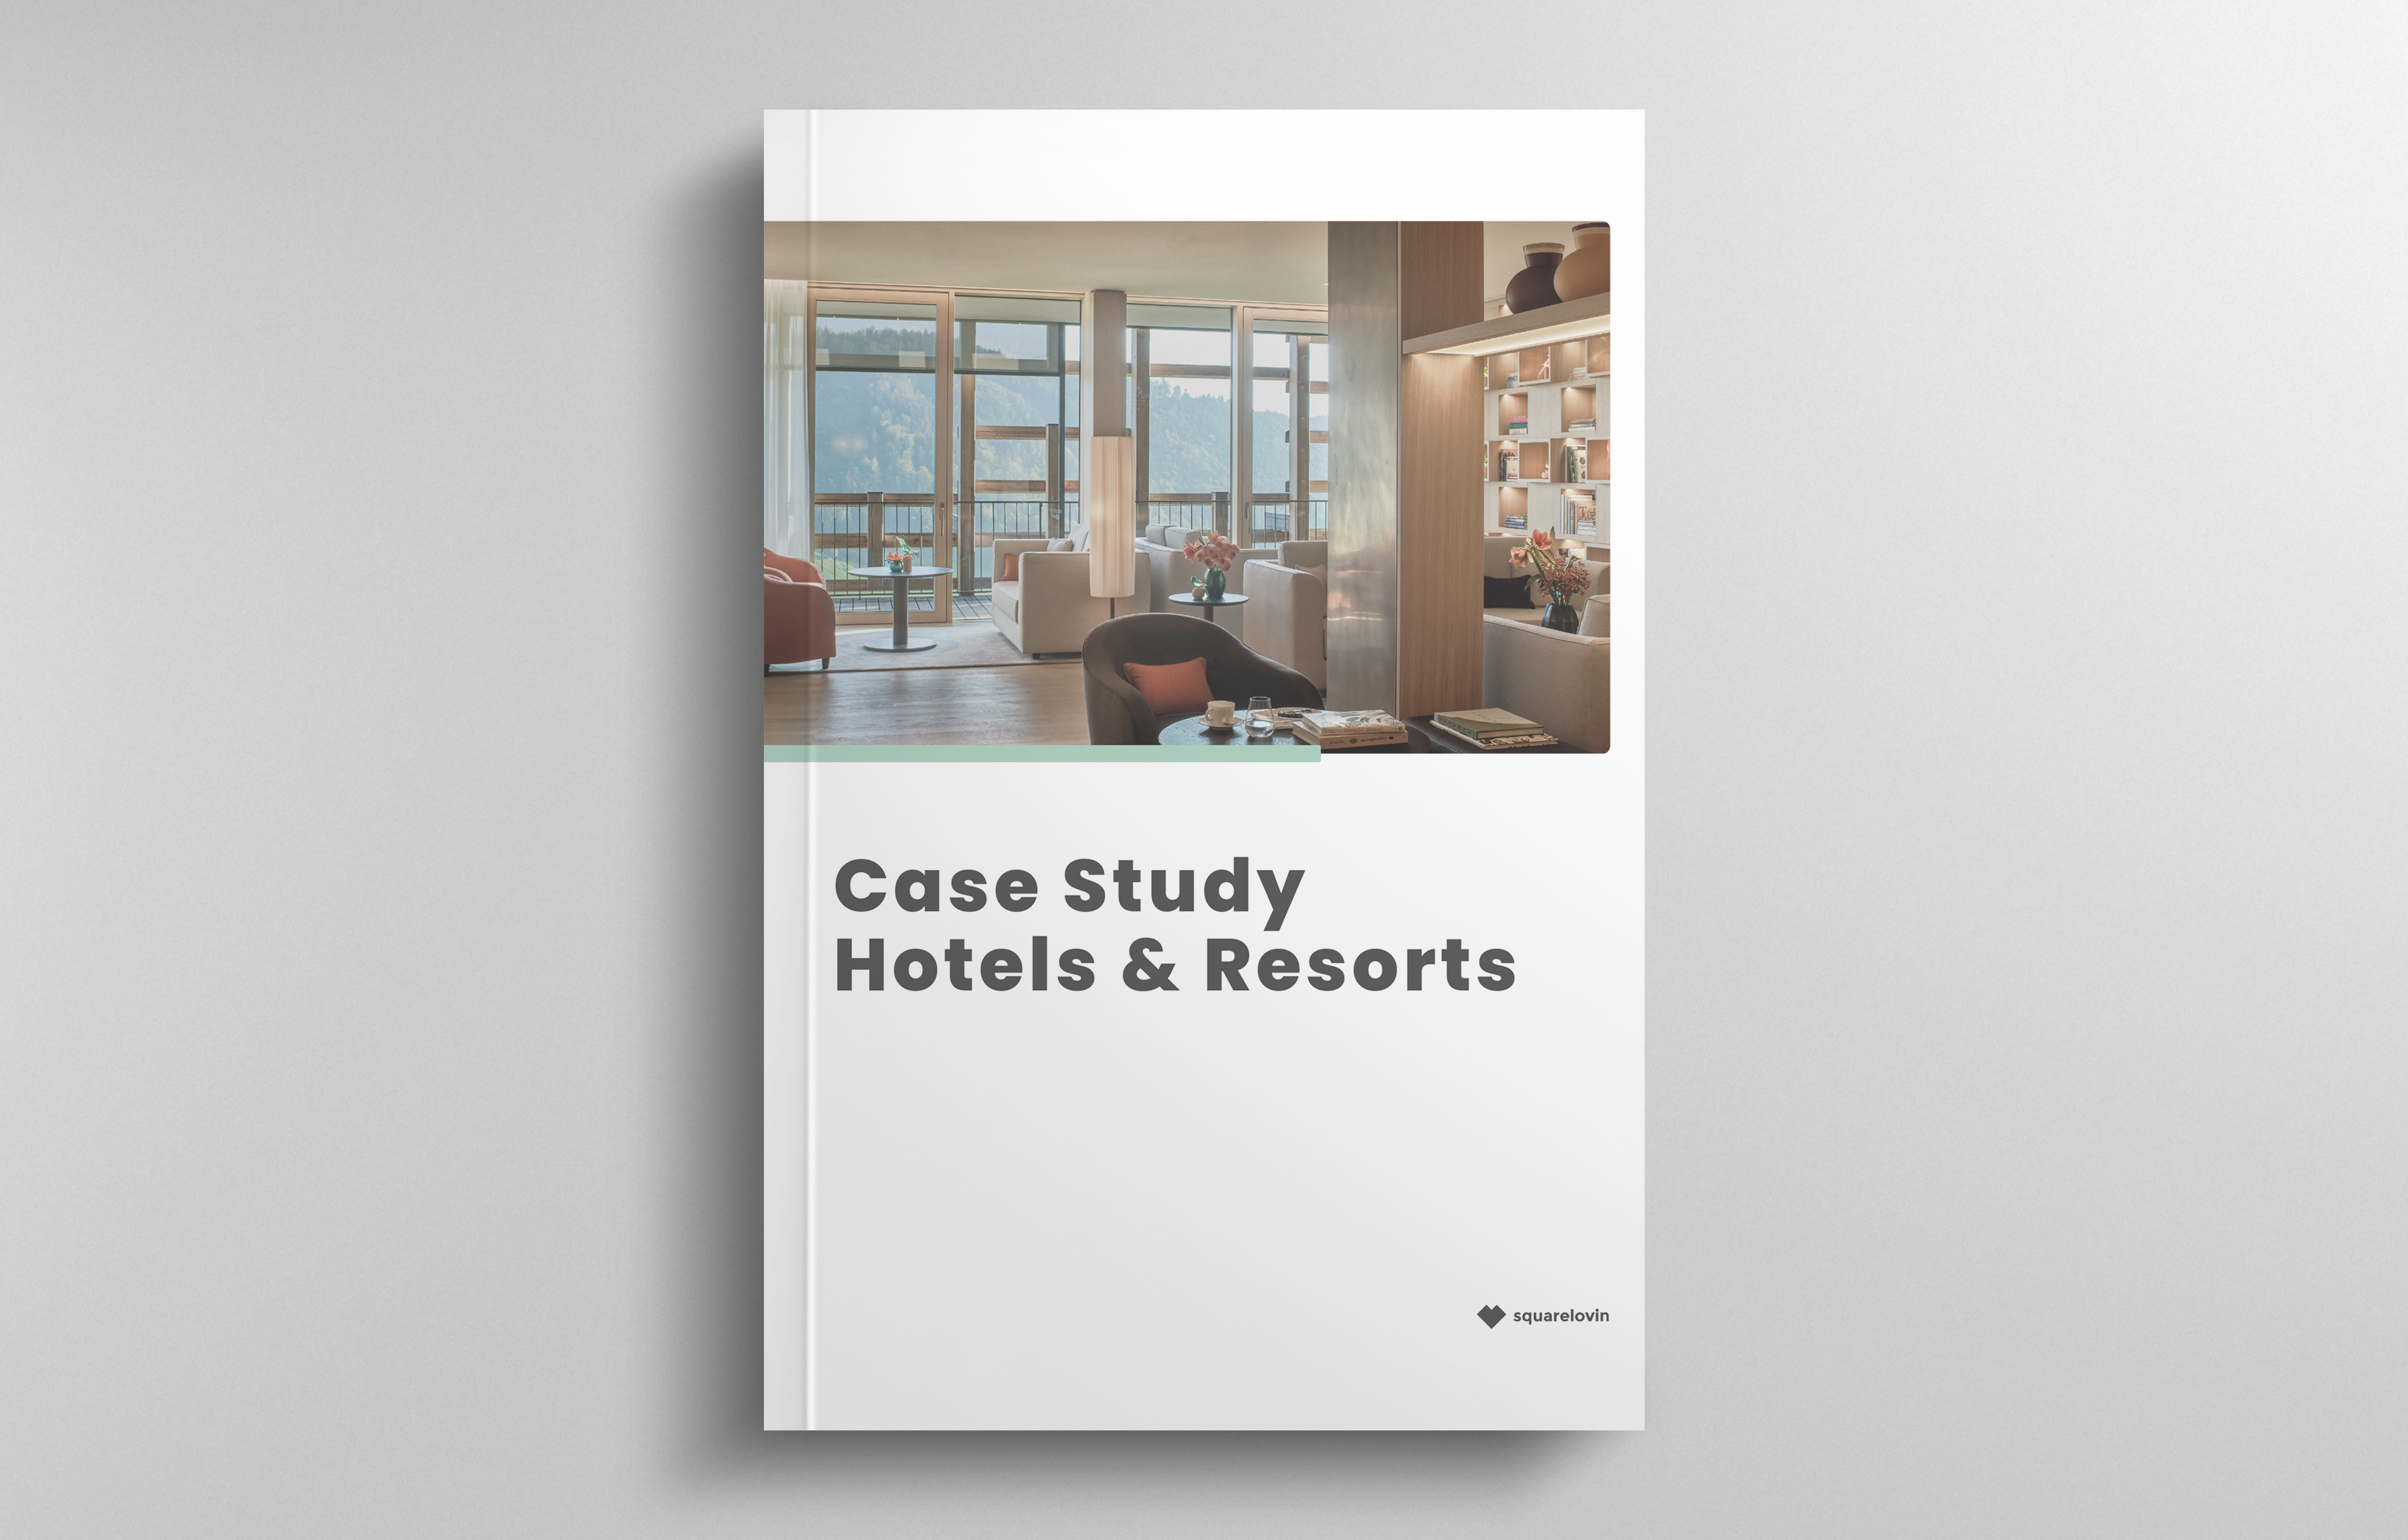 Protected: Case Study Hotels & Resorts